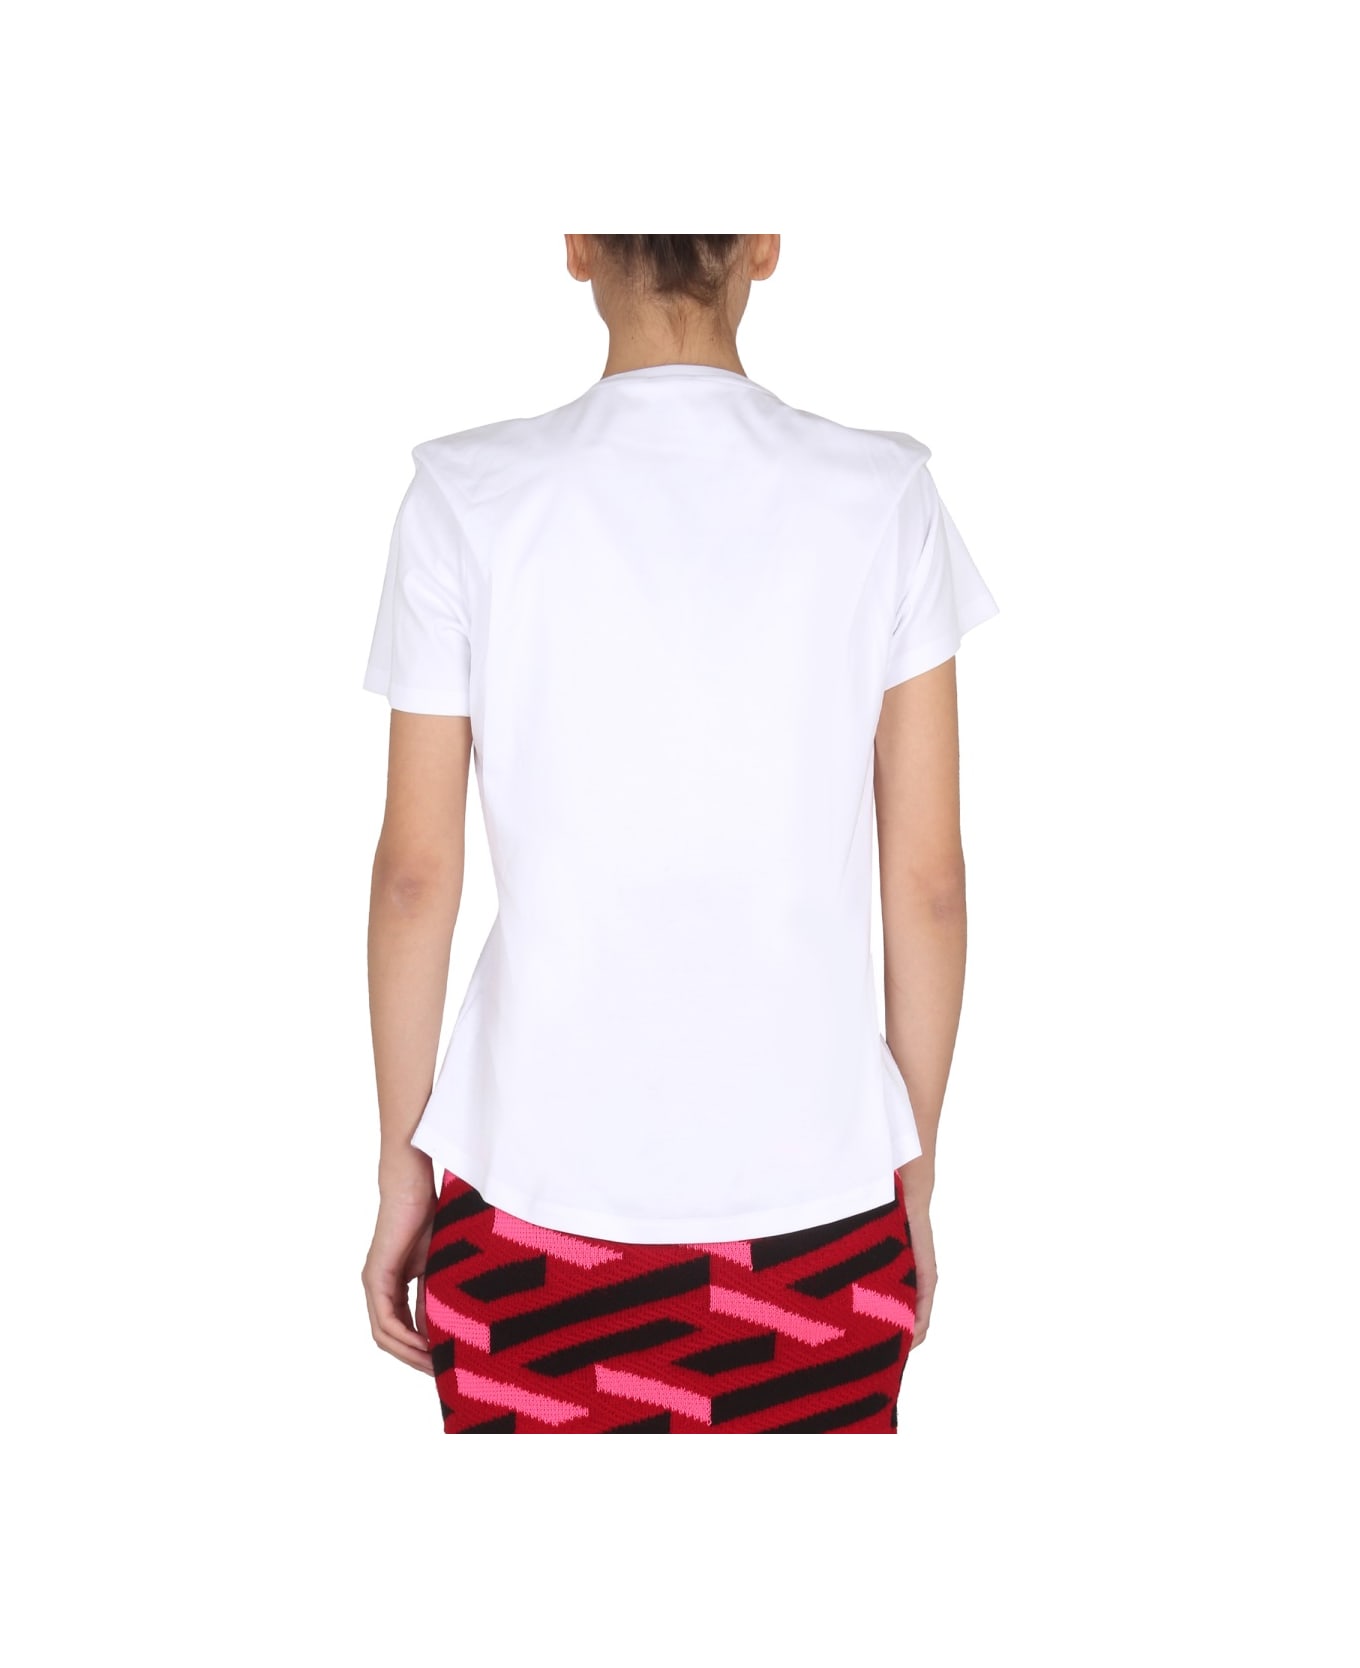 Versace T Shirt With Logo - WHITE